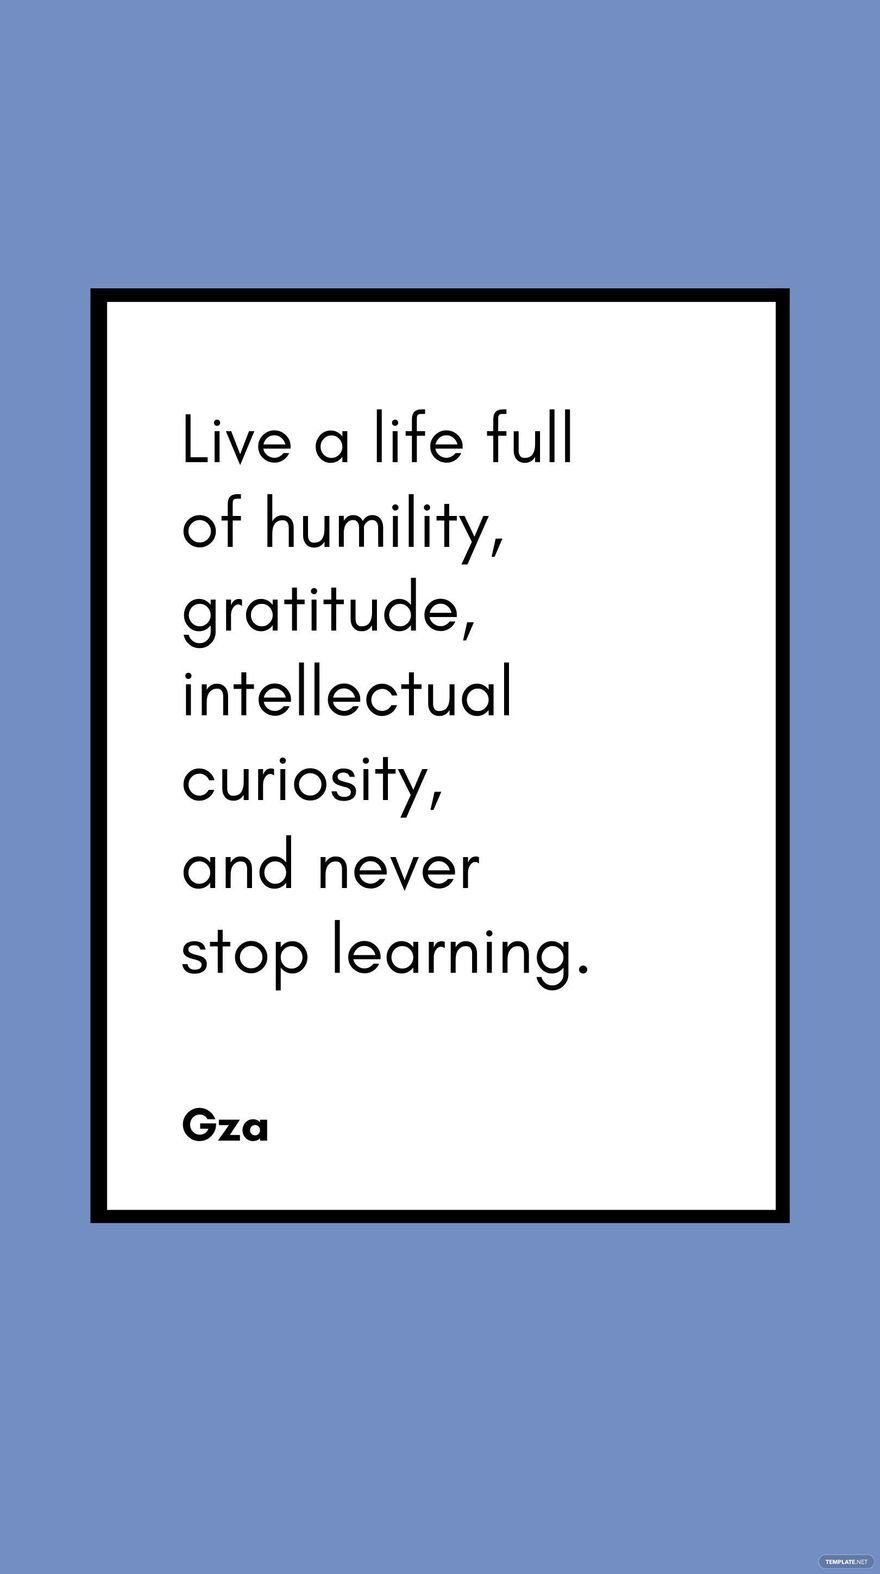 Gza - Live a life full of humility, gratitude, intellectual curiosity, and never stop learning.